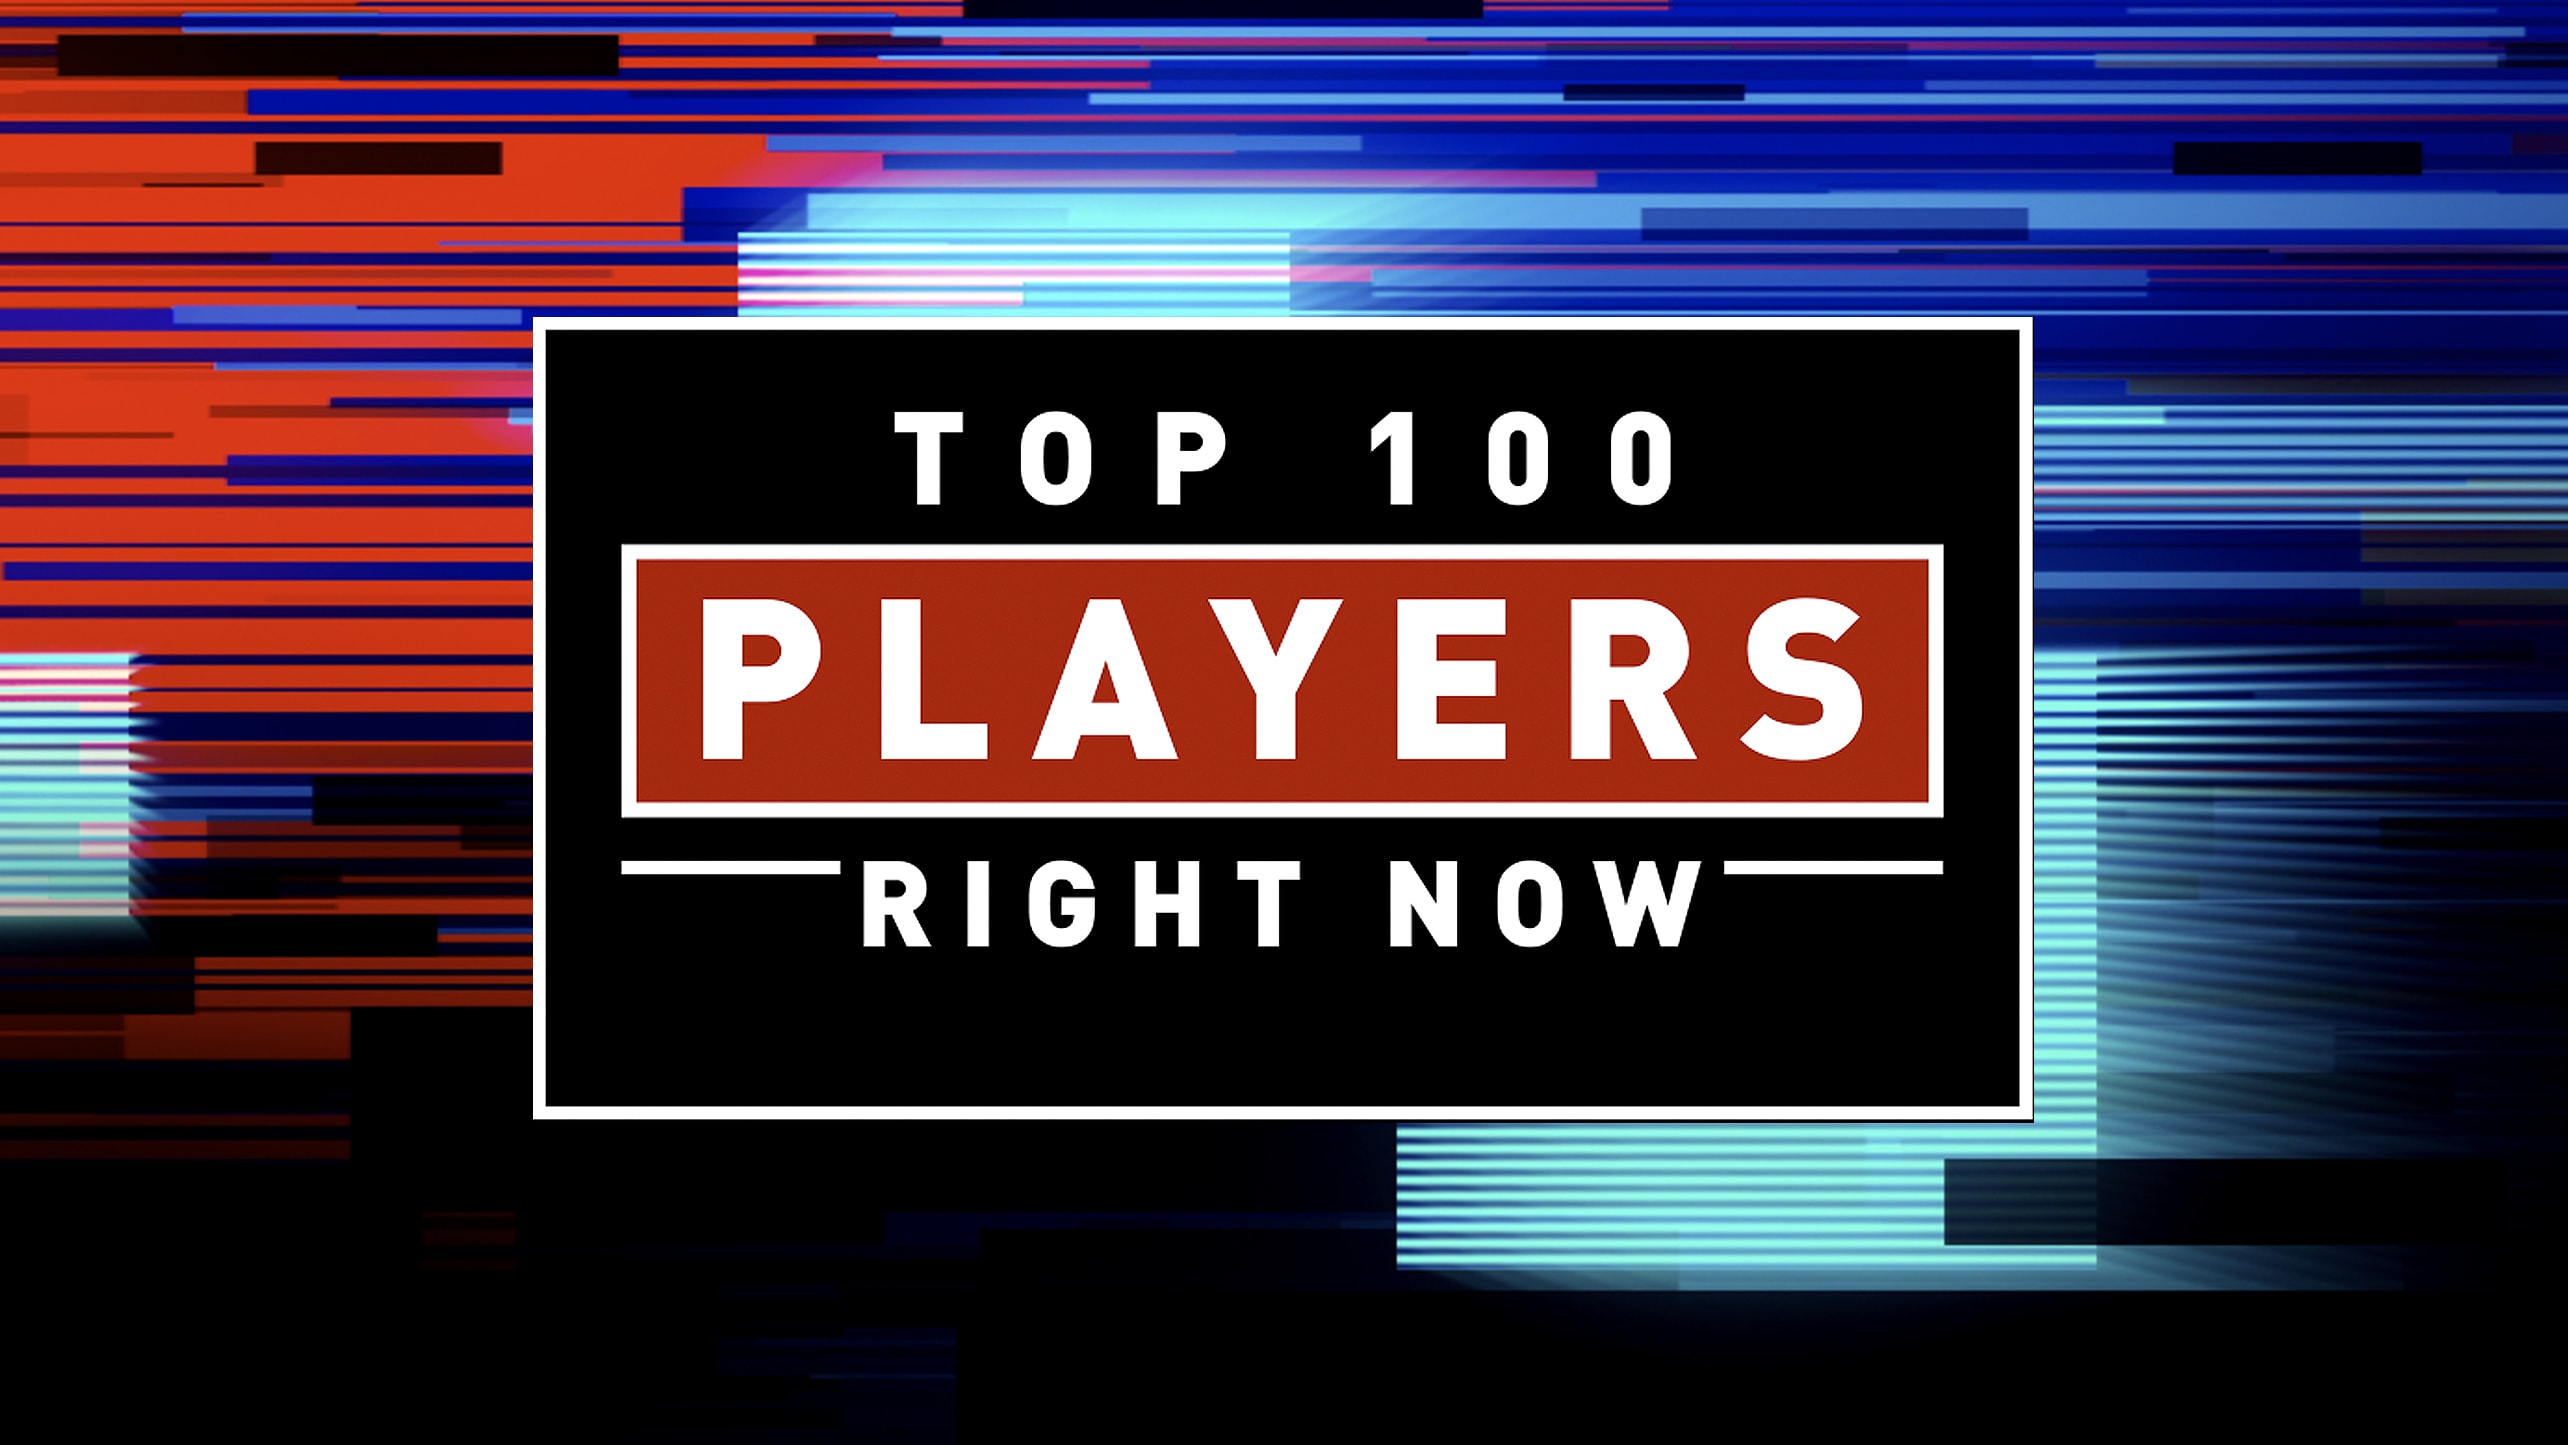 MLB Network's Top 100 Players Right Now